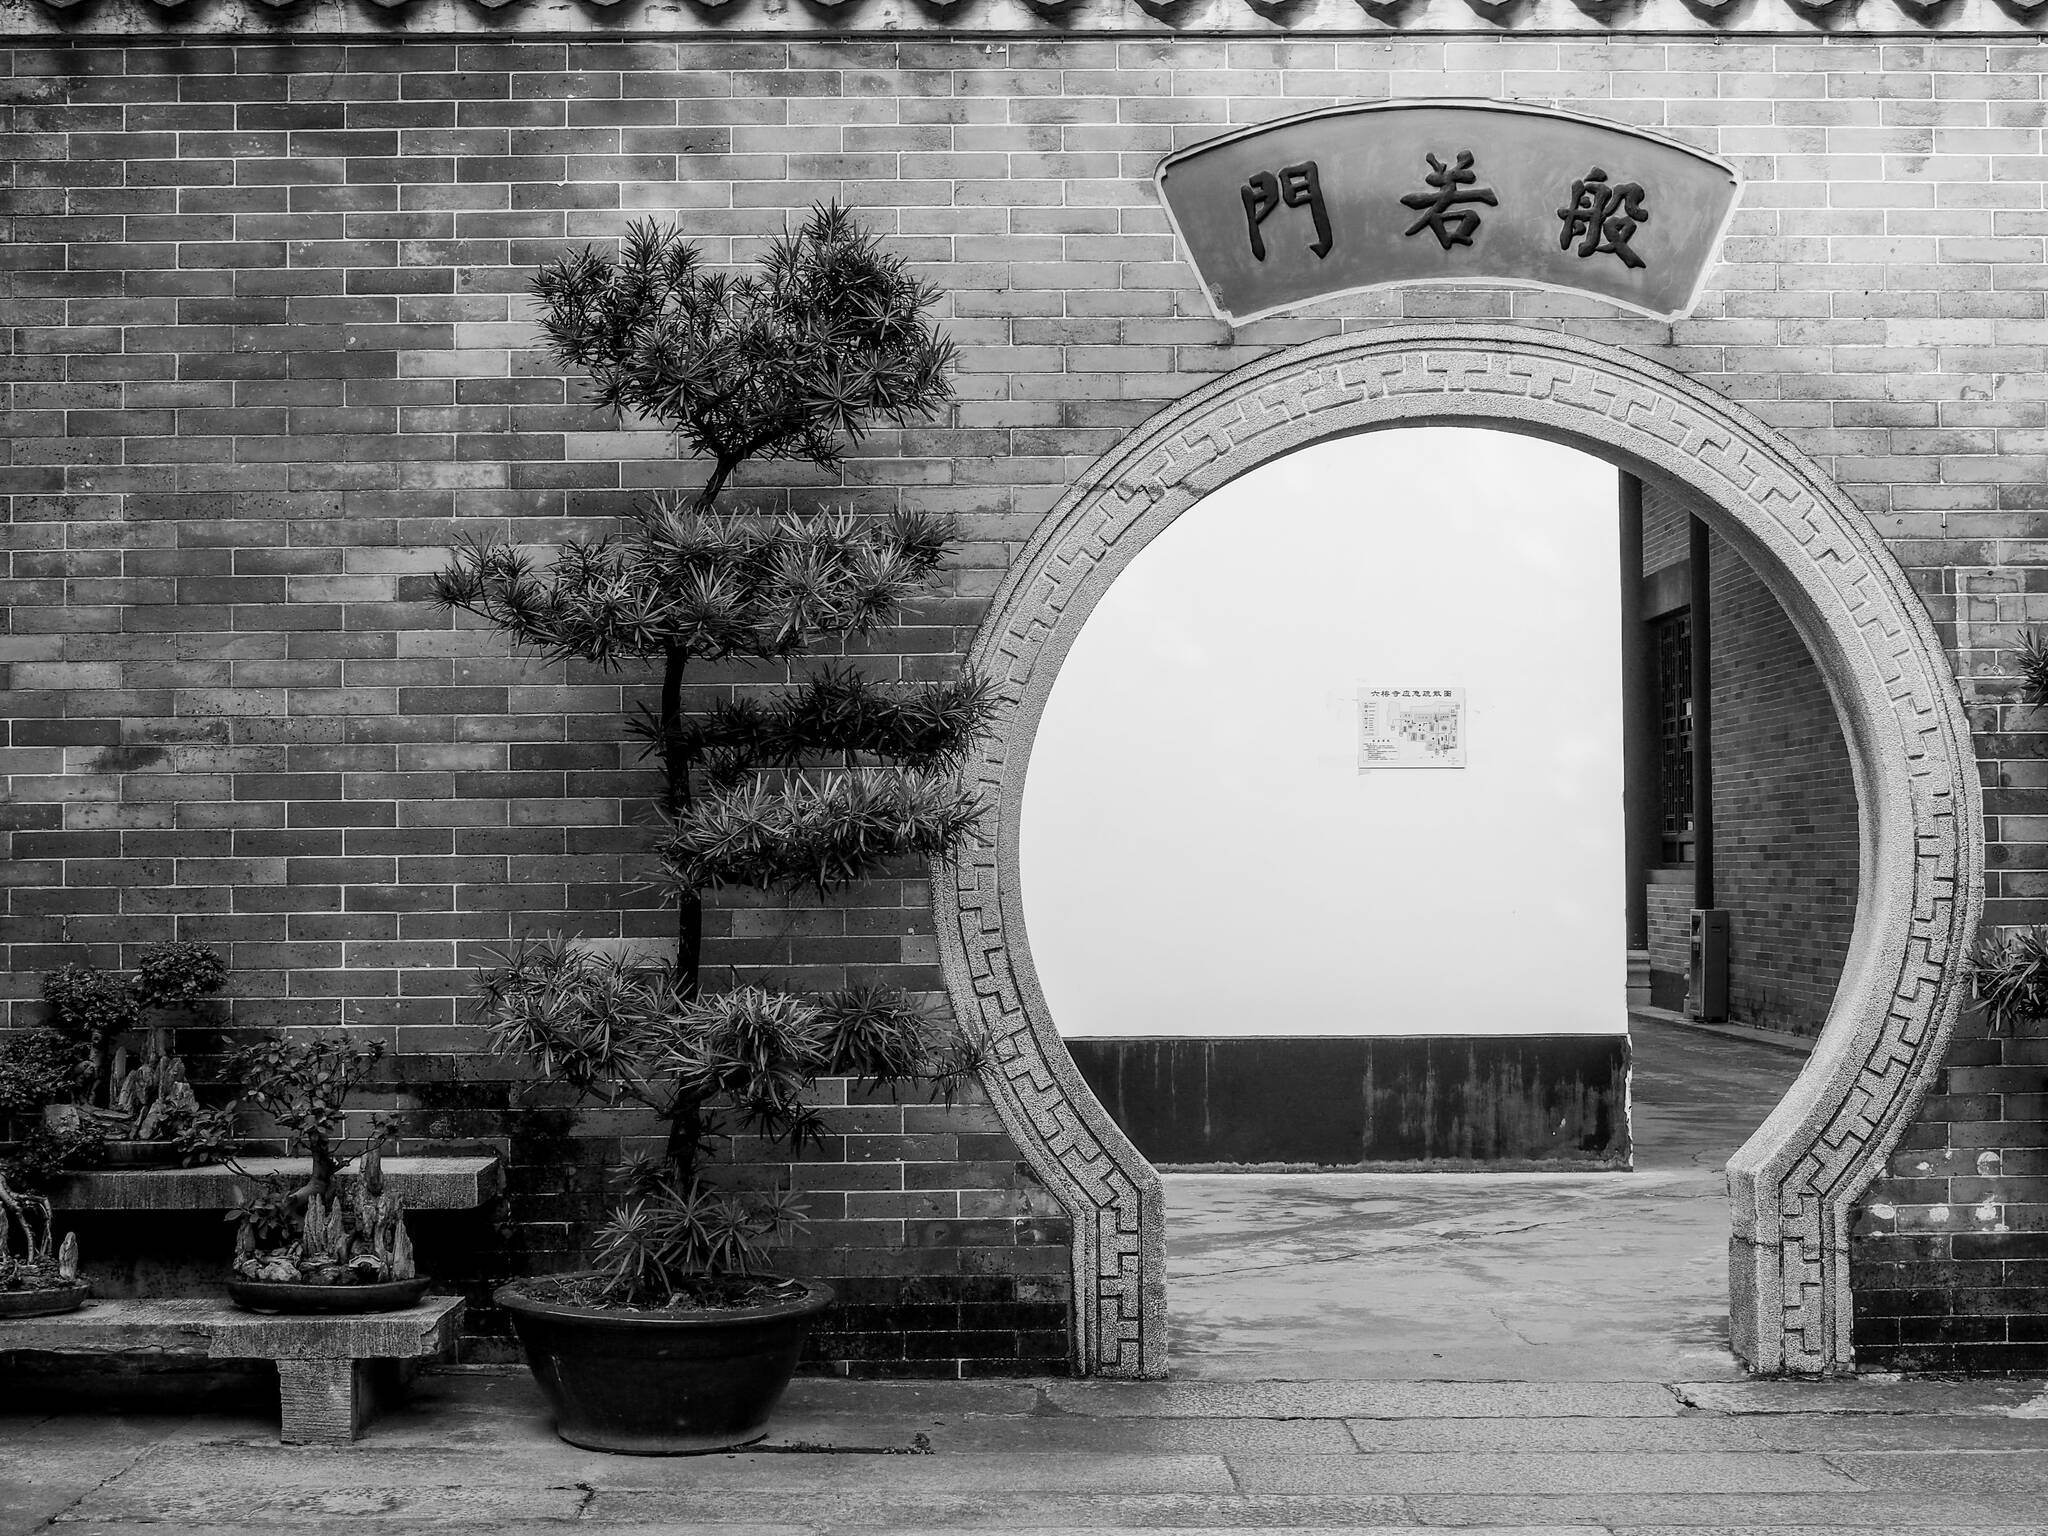 Jonathan Swinton is the featured artist for the month of April at the Juneau Artists Gallery. “China in Monochrome,” is the name of his show featuring images taken on several trips to China and Taiwan. (Courtesy Photo / Jonathan Swinton)